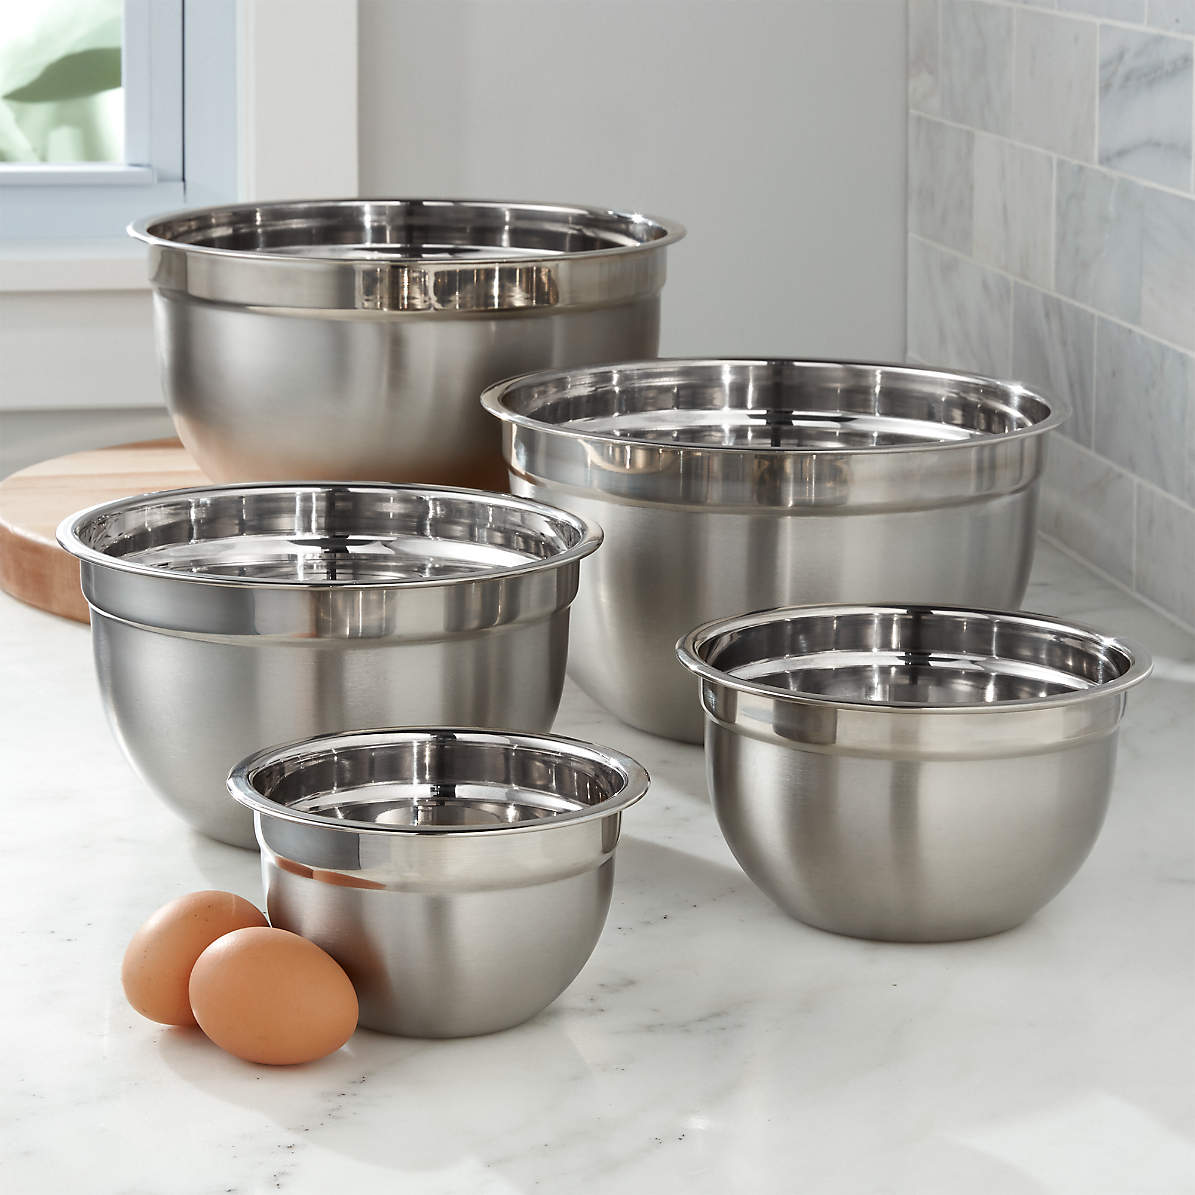 Great Gatherings 5-Quart Stainless Steel Mixing Bowl